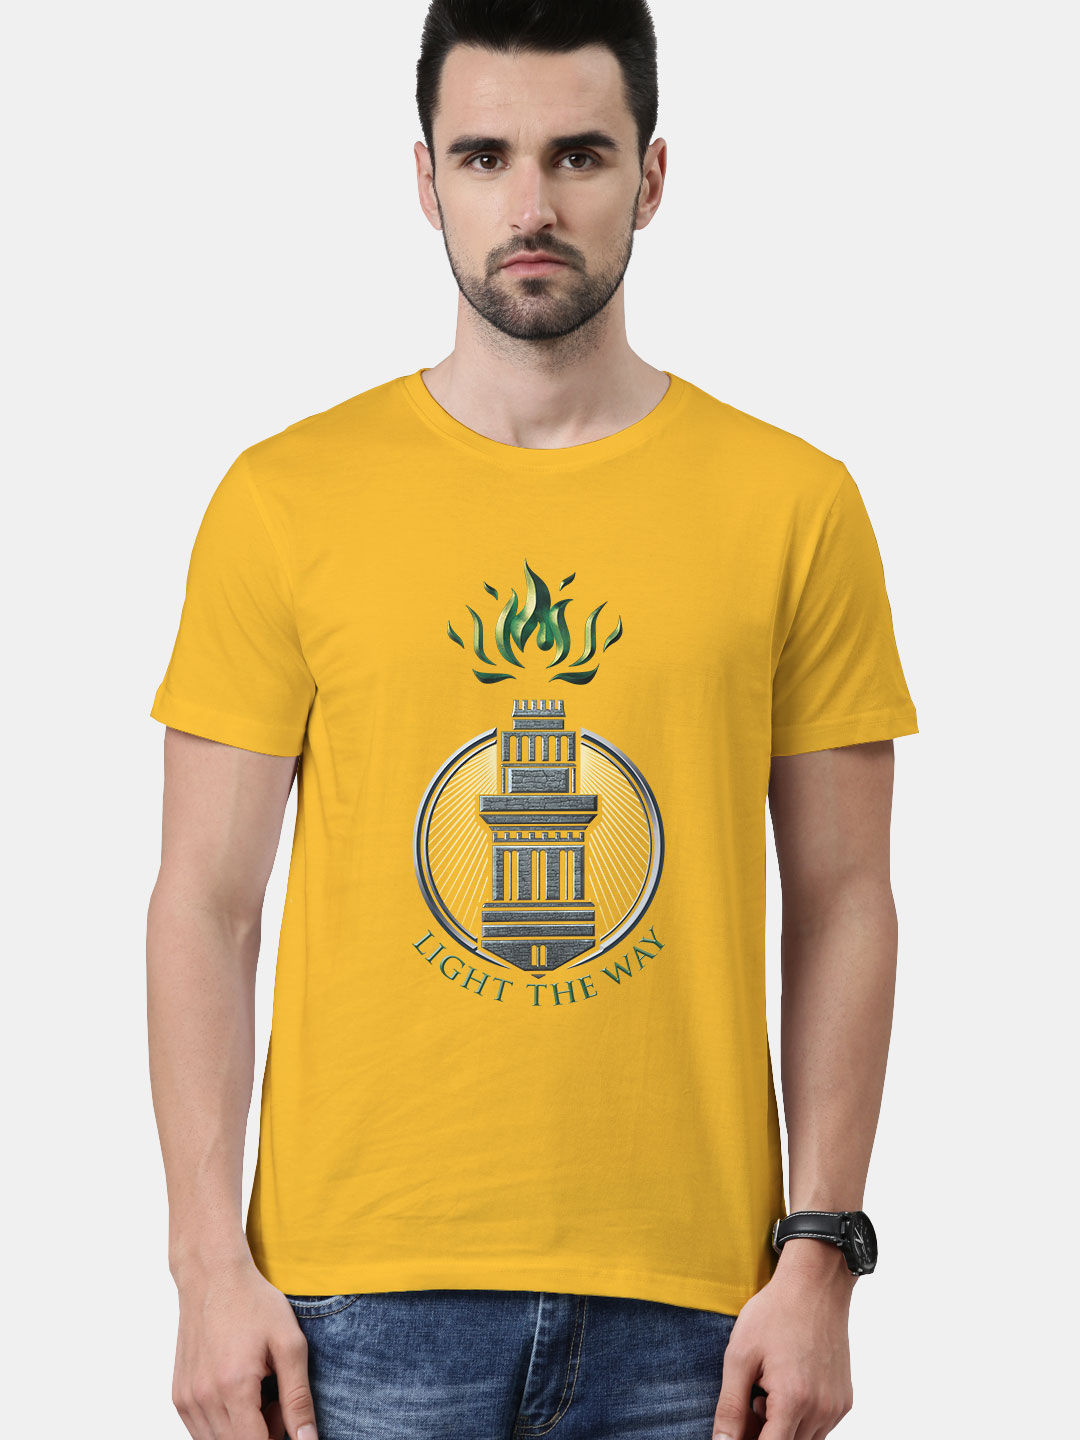 Buy Light the Way Front Yellow - Male Designer T-Shirts T-Shirts Online